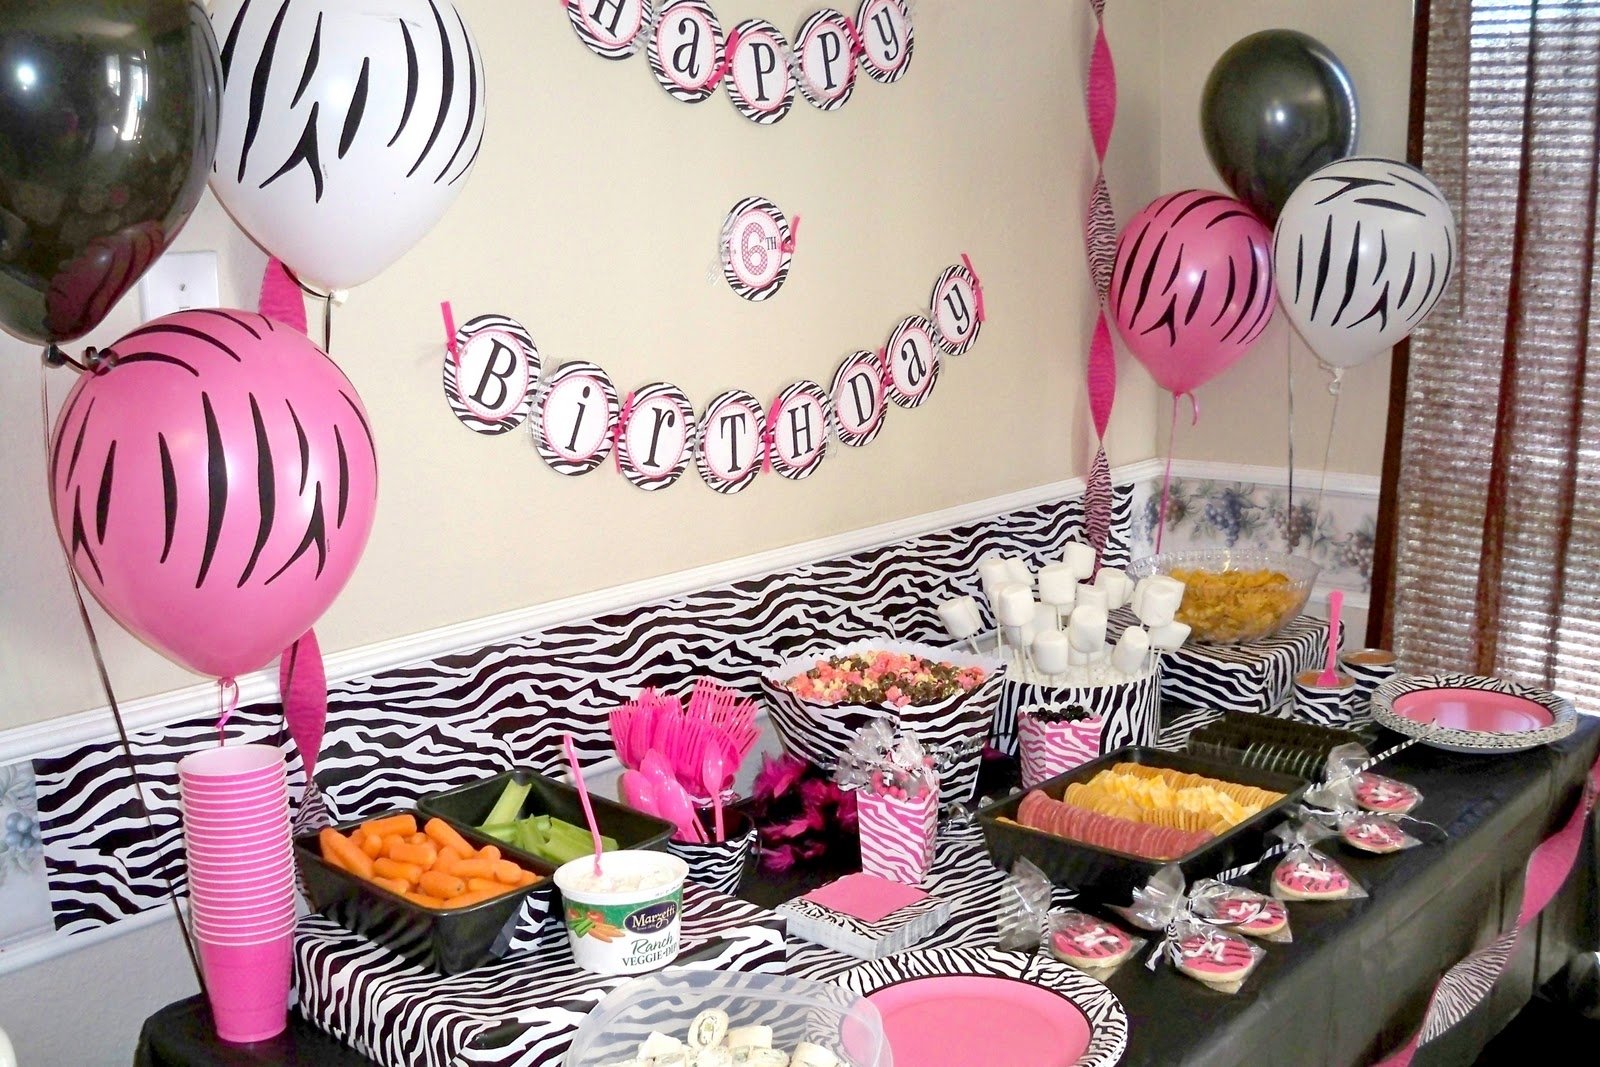 10 Ideal Pink And Zebra Party Ideas hot pink zebra diva birthday party ideas animal print party table 3 2022